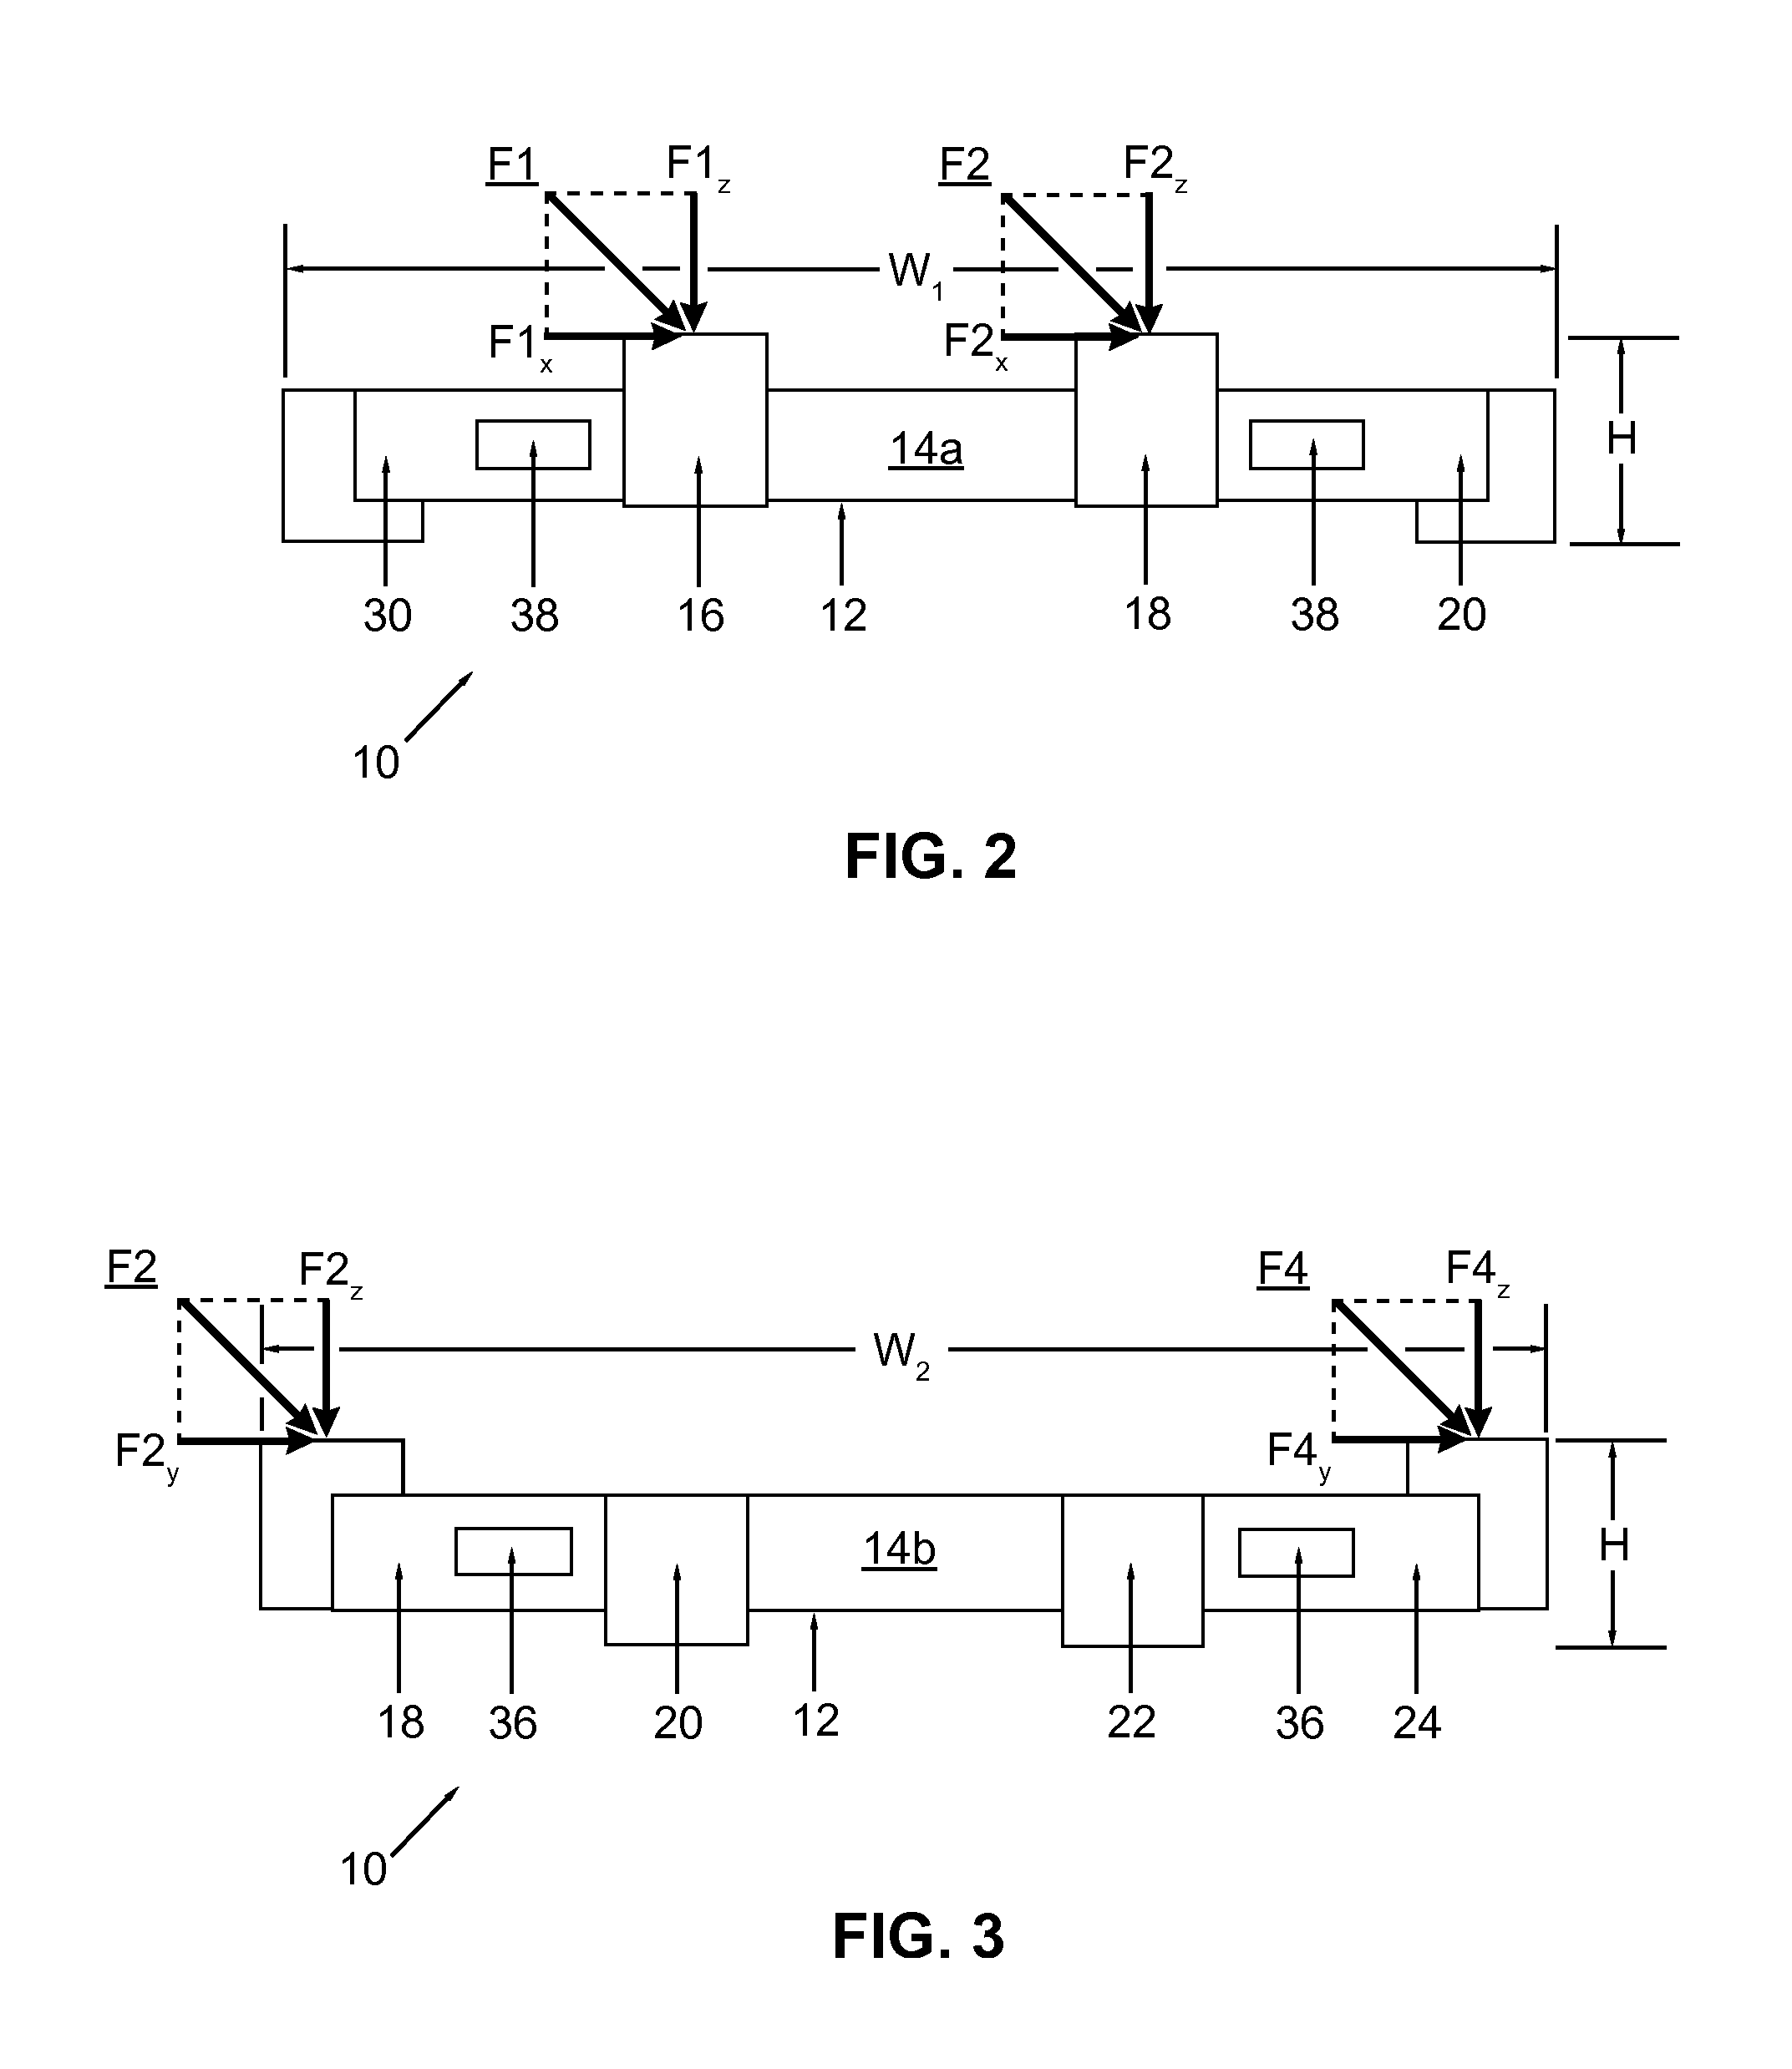 Load transducer and force measurement assembly using the same